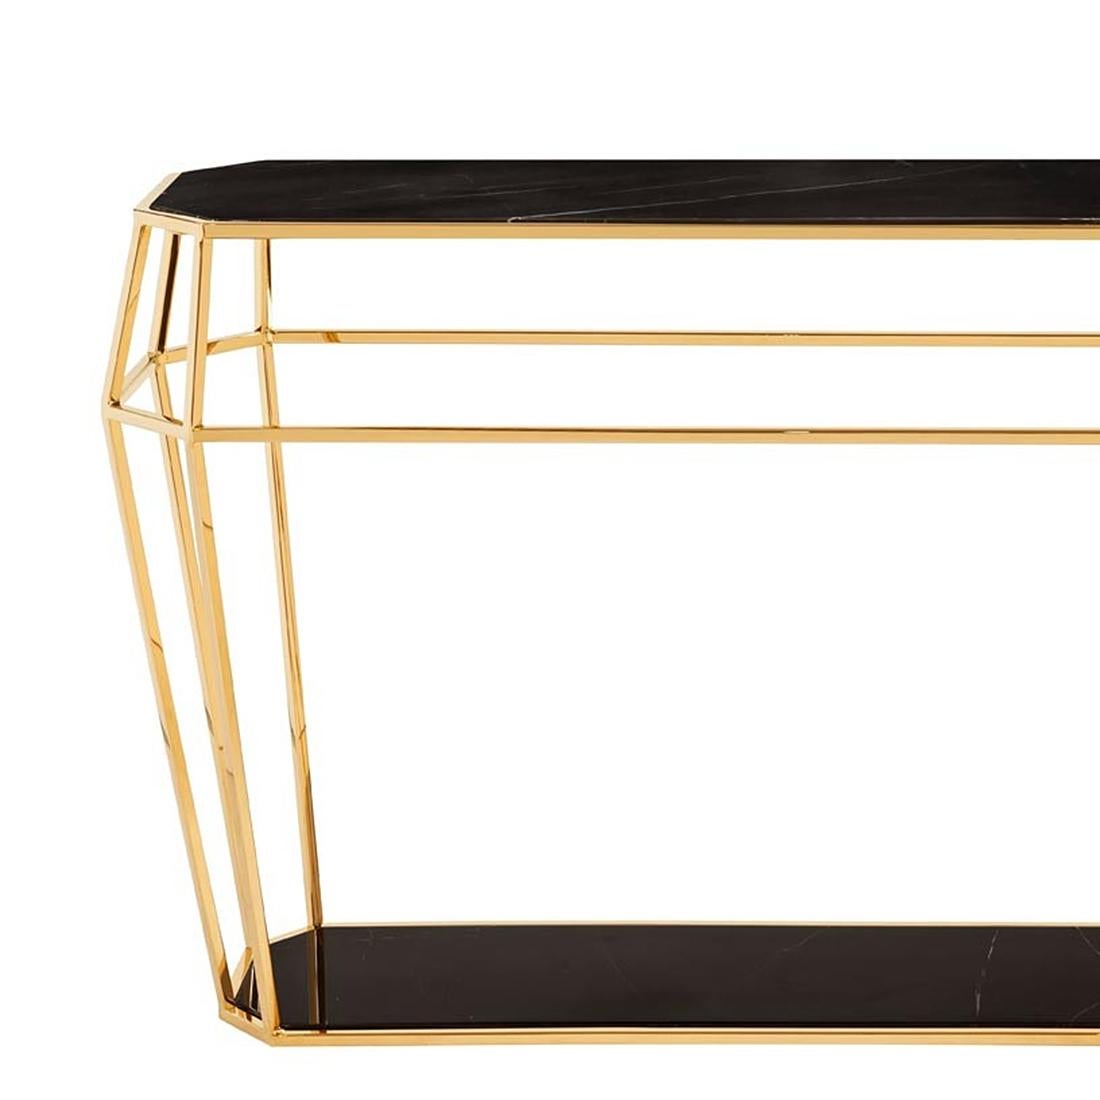 Console table Talisma marble with metal
structure in gold finish, with black marble tops.
Also available with structure in copper finish with
white marble tops.